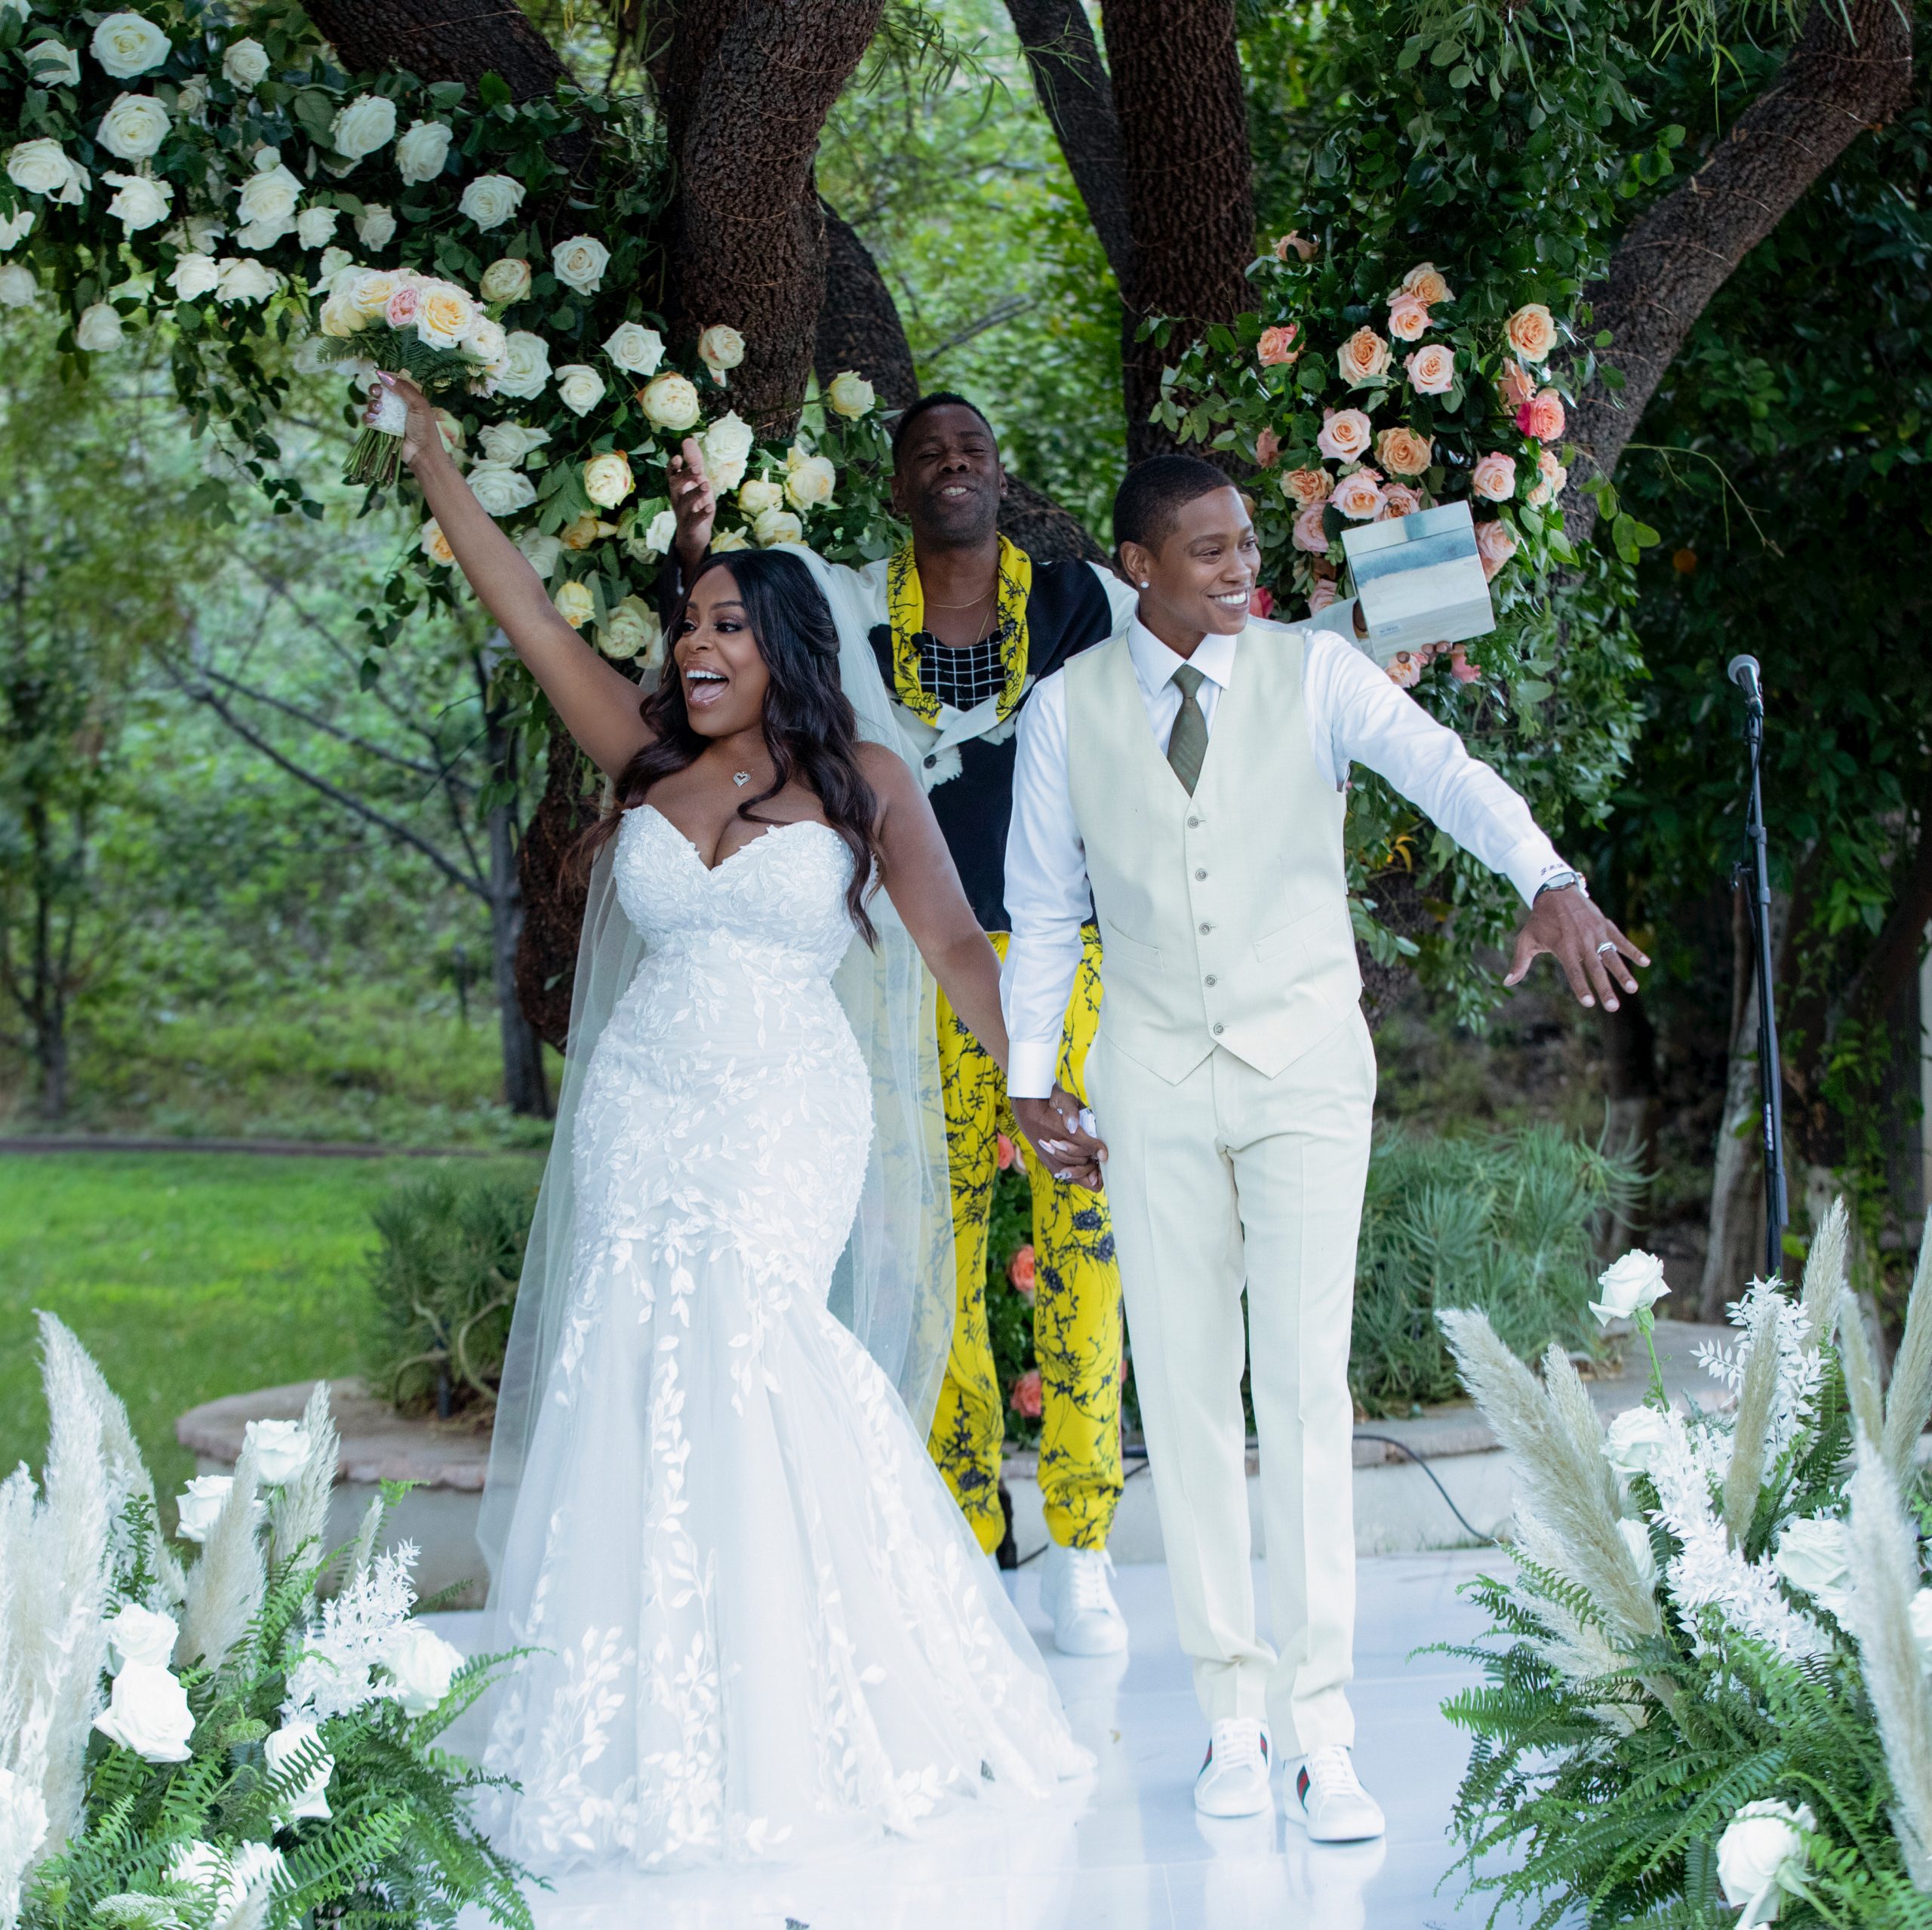 Niecy Nash Ties The Knot, What About That Wedding Dress